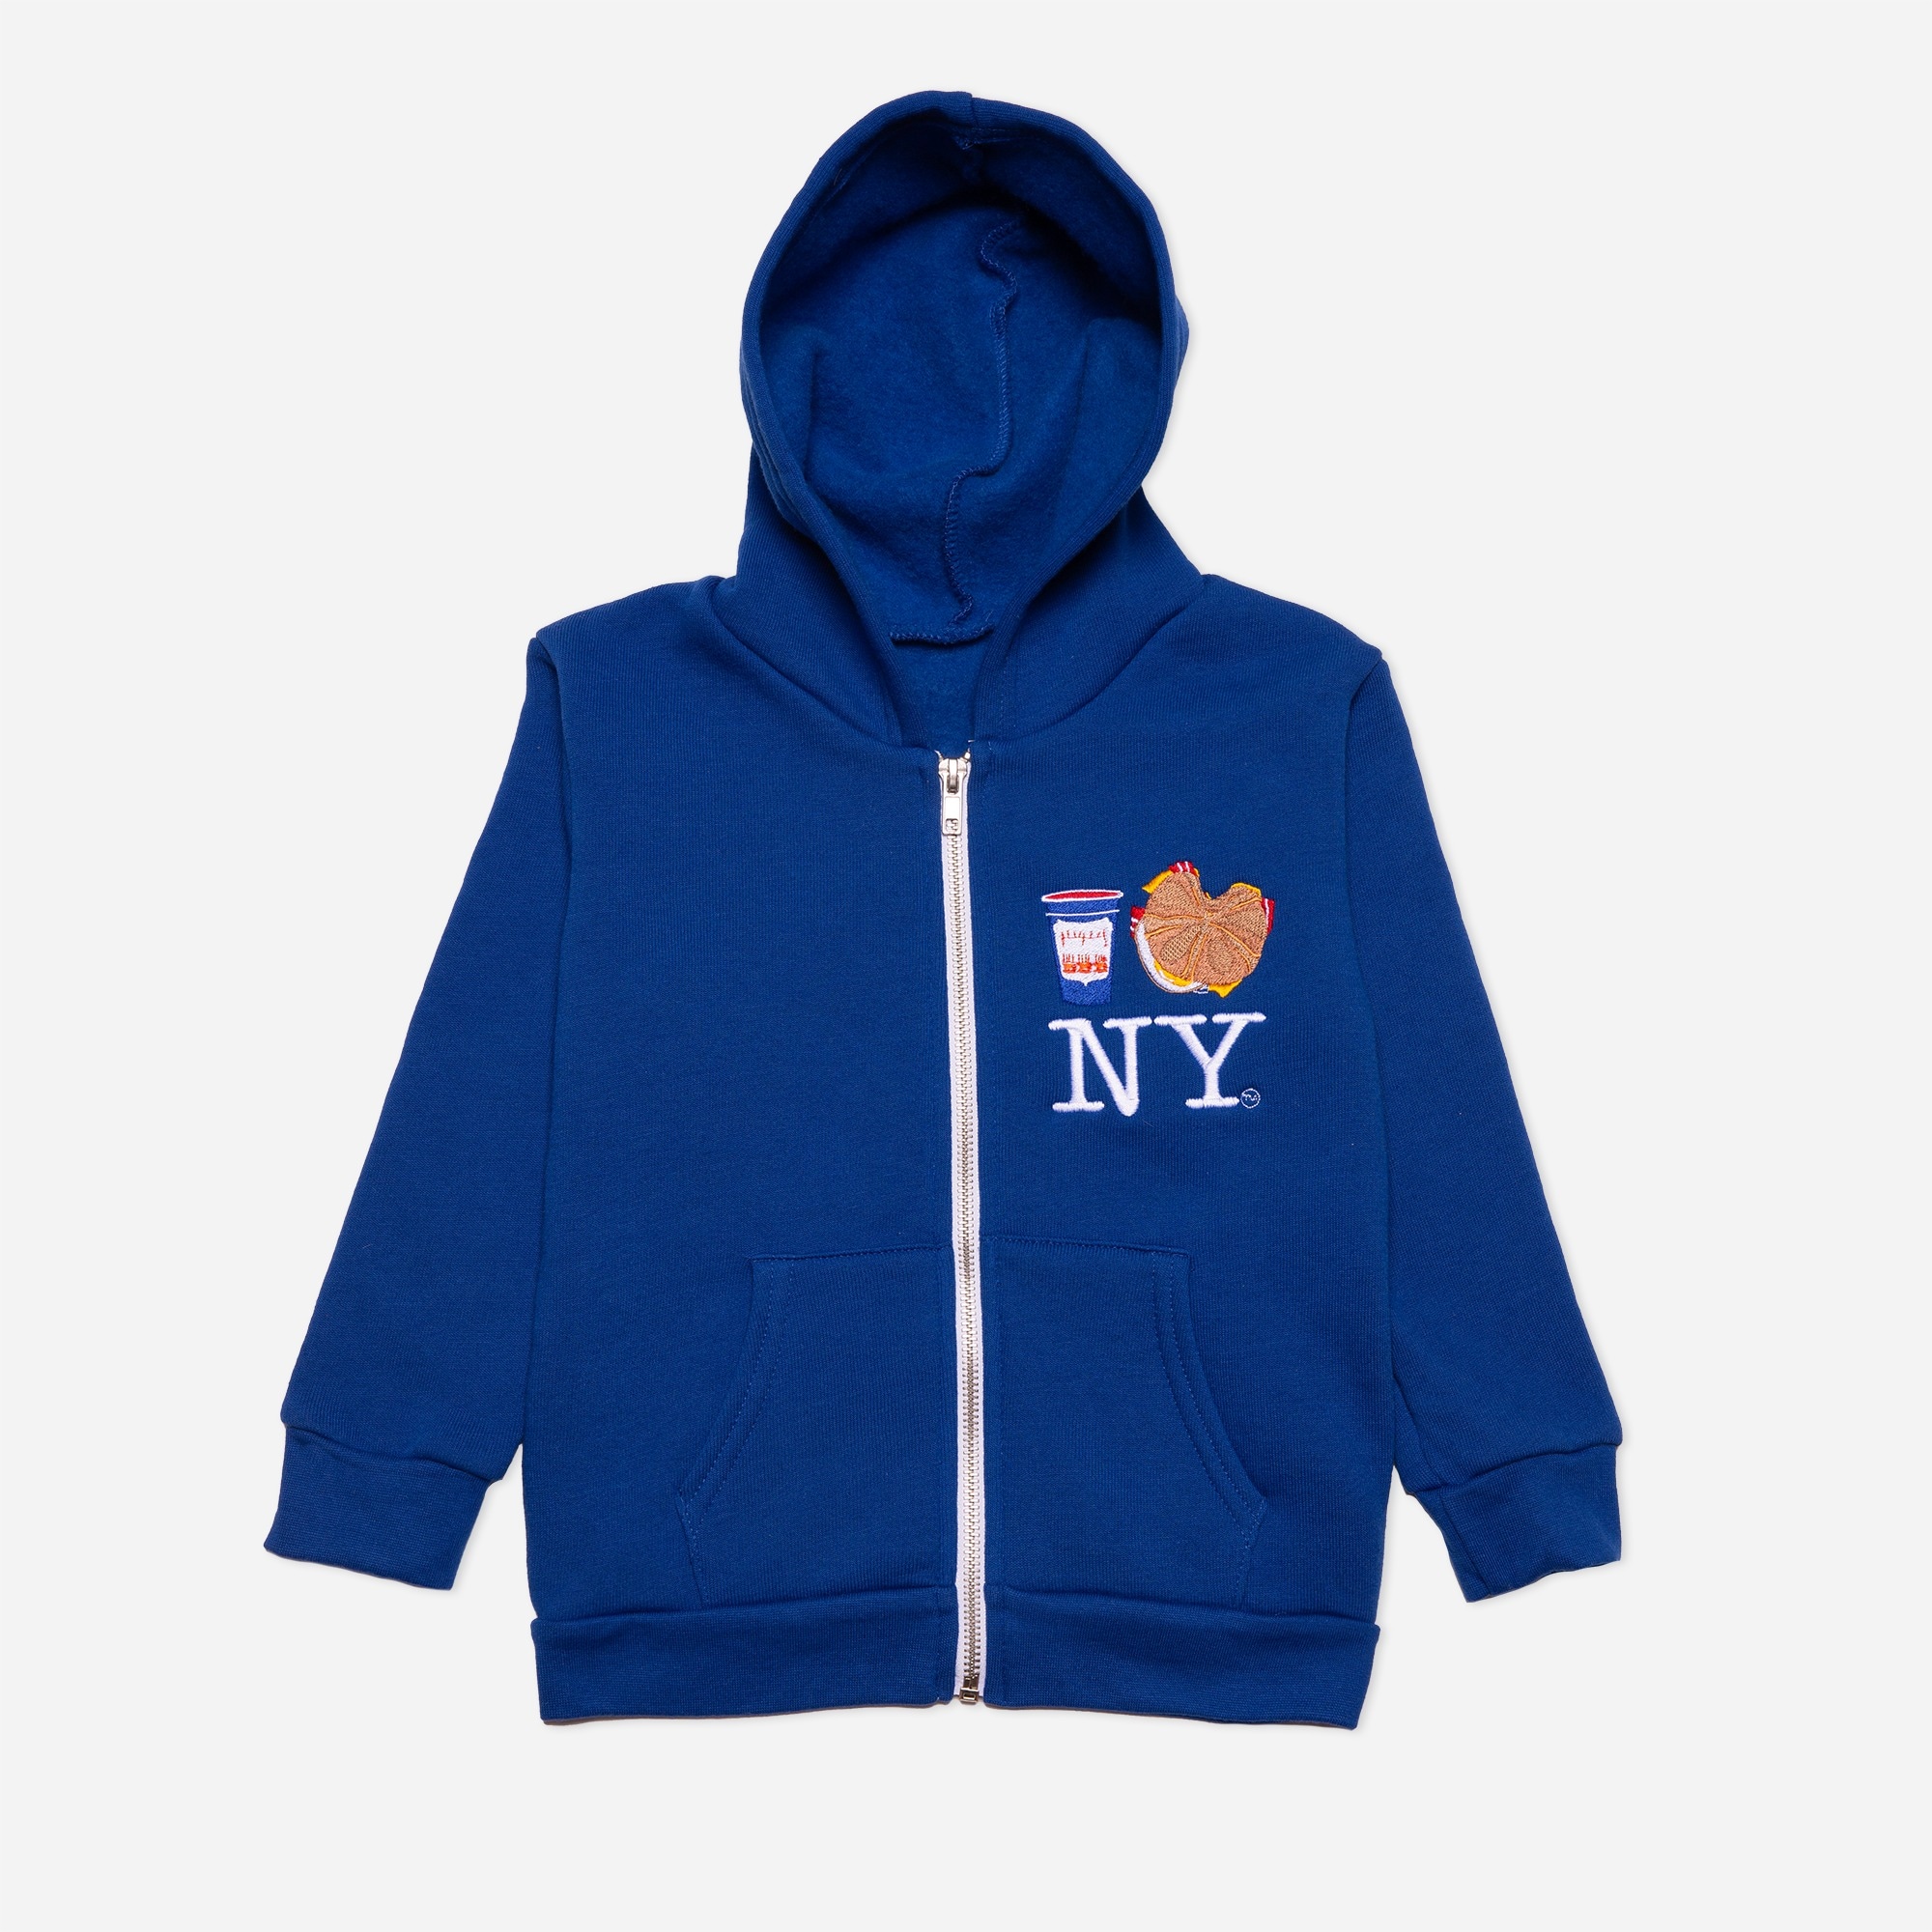 Jcrew PiccoliNY coffee, bacon, egg and cheese NY hoodie